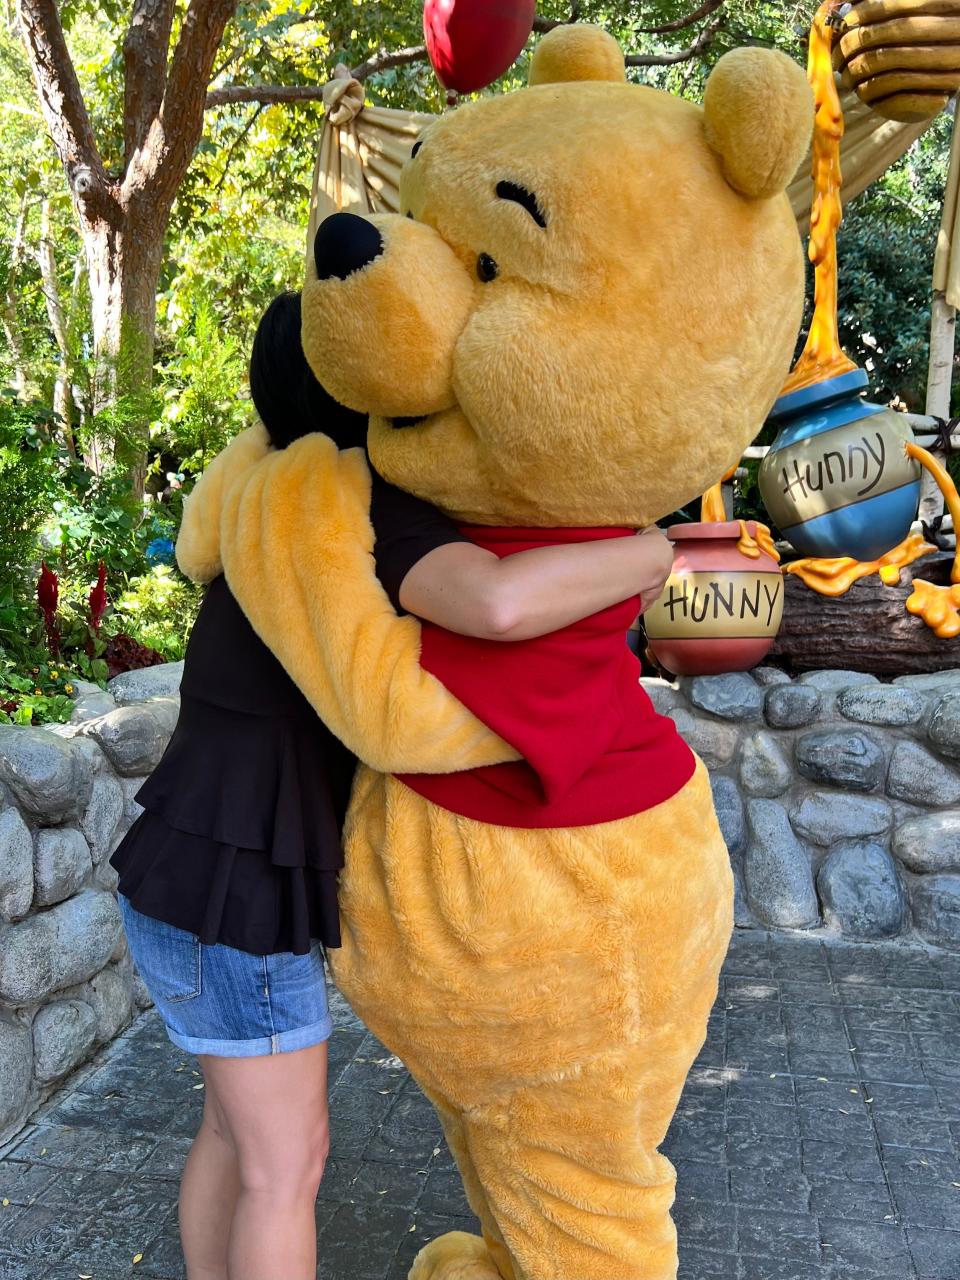 Guests can use Disneyland and Disney World's apps to find characters like Winnie the Pooh.